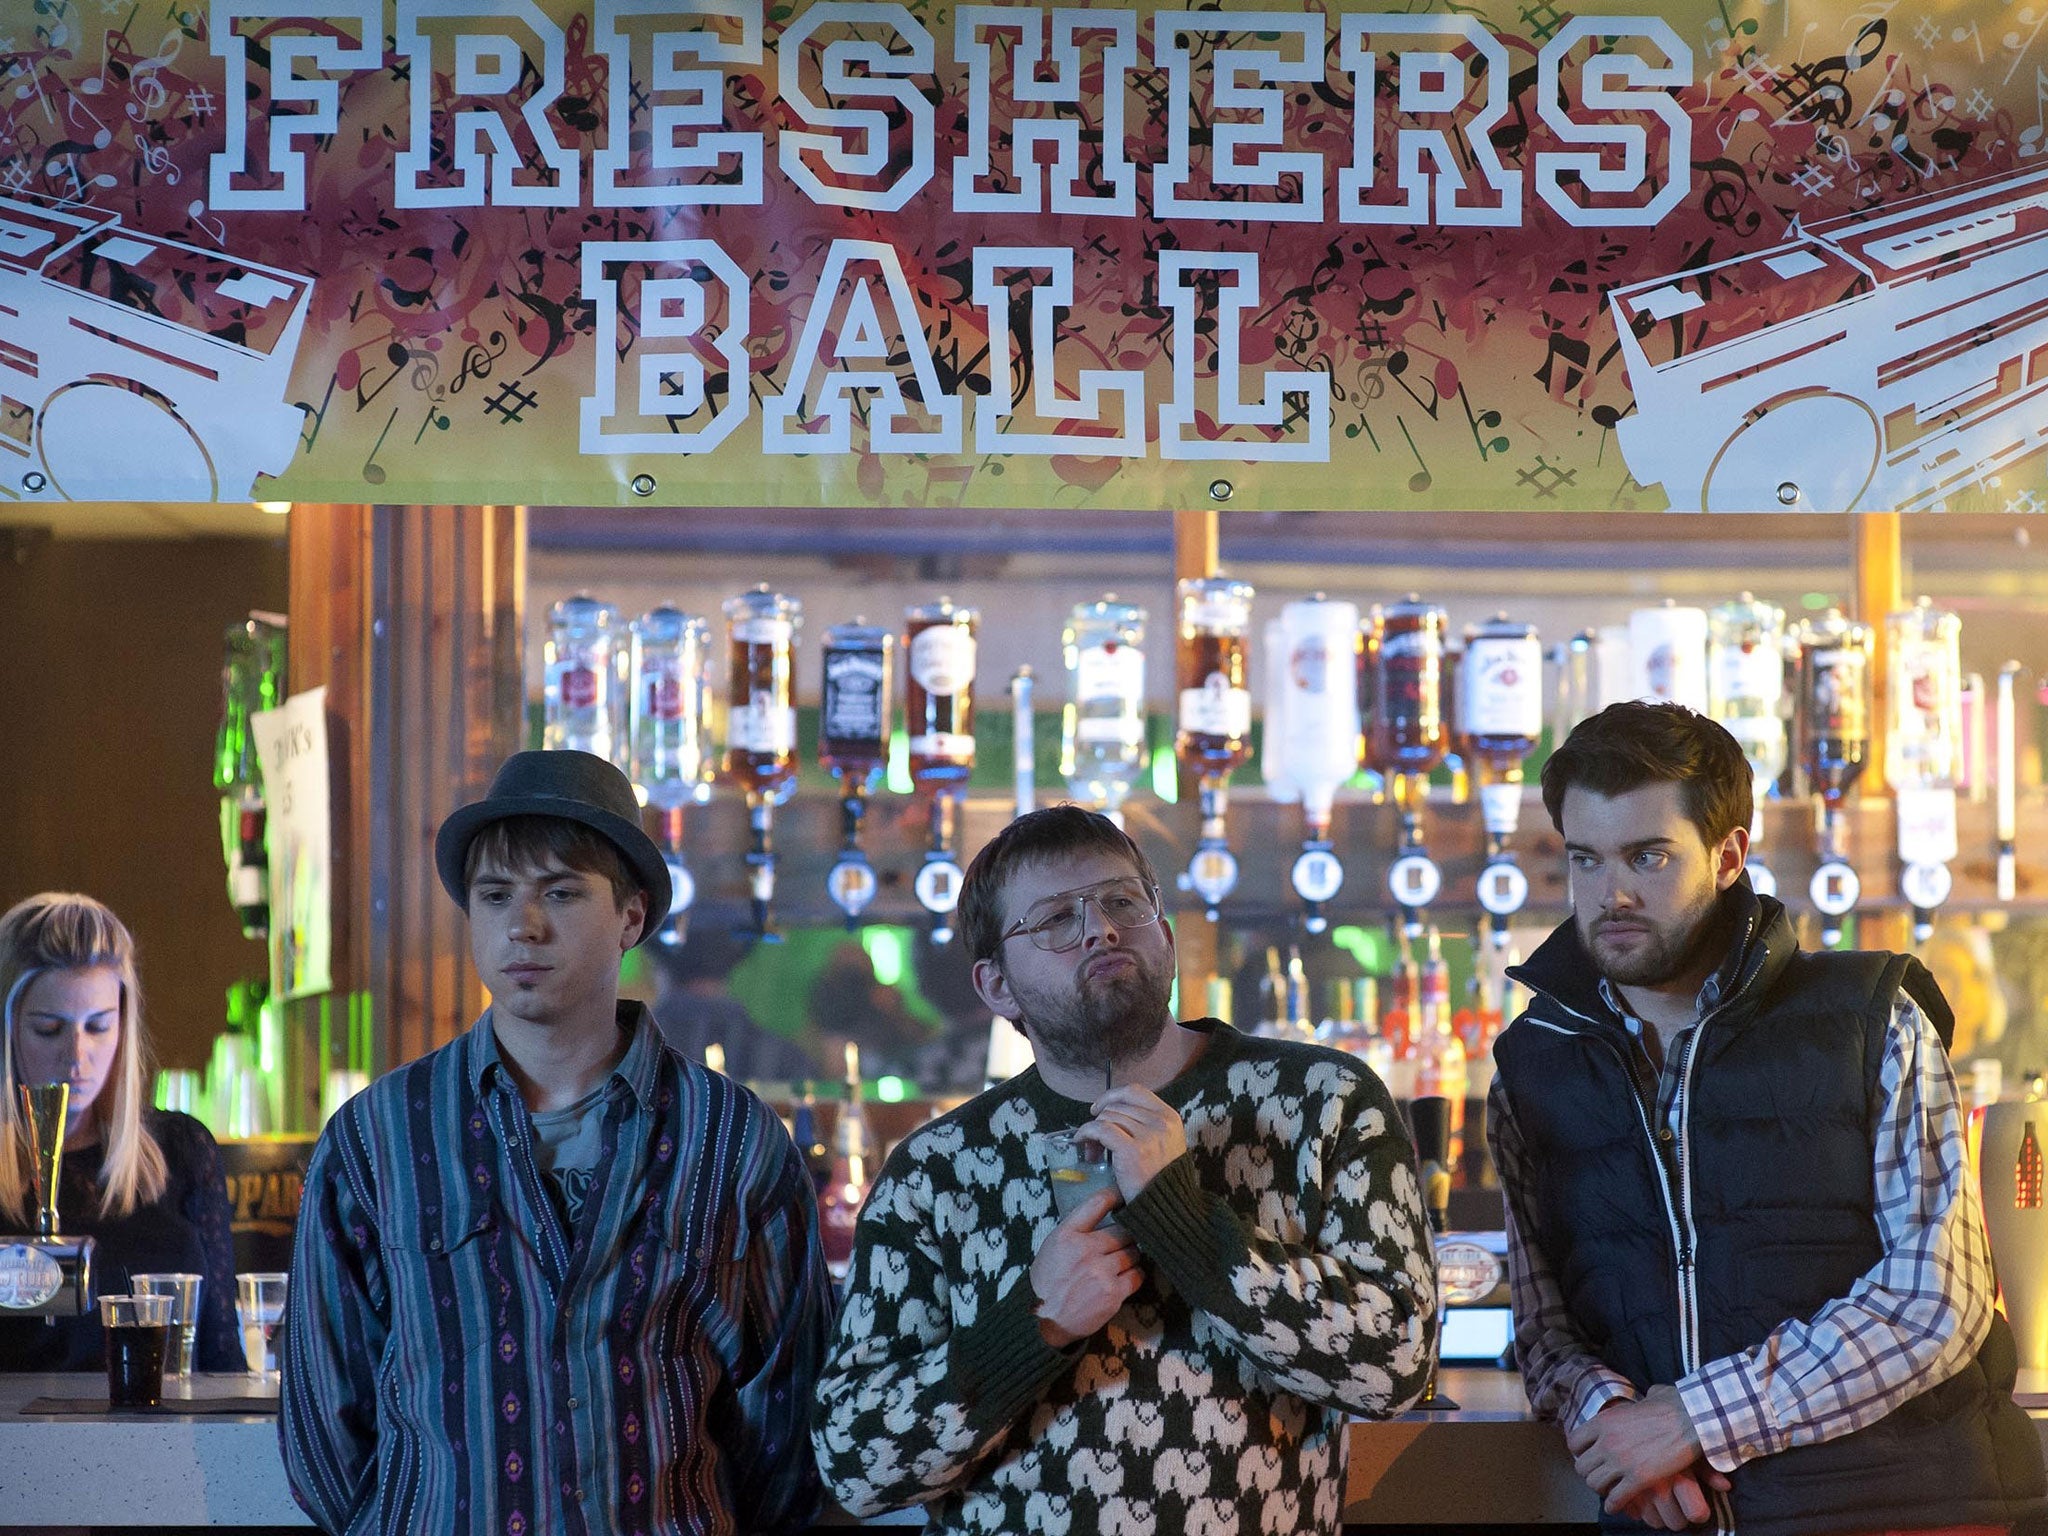 Over the next two weeks the current series of Fresh Meat will come to a close